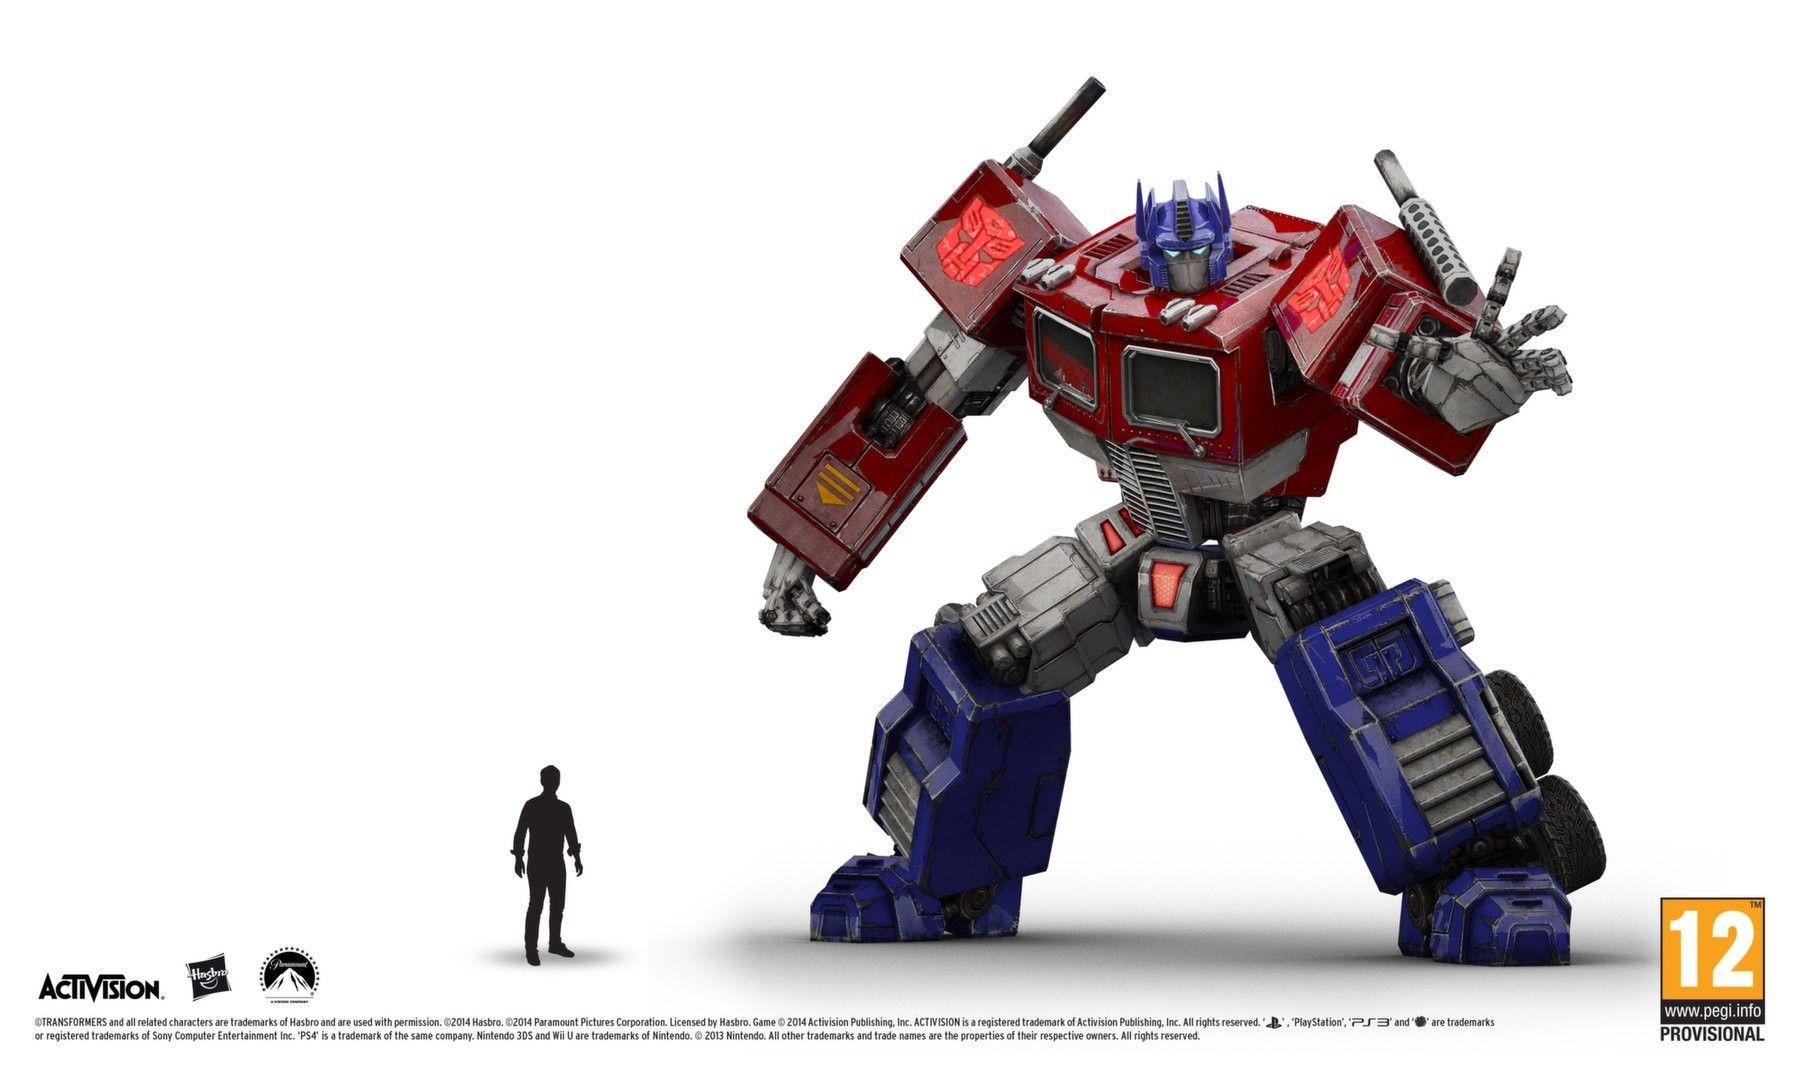 Rise of the Dark Spark Optimus Wallpaper. TFW2005 2005 Boards